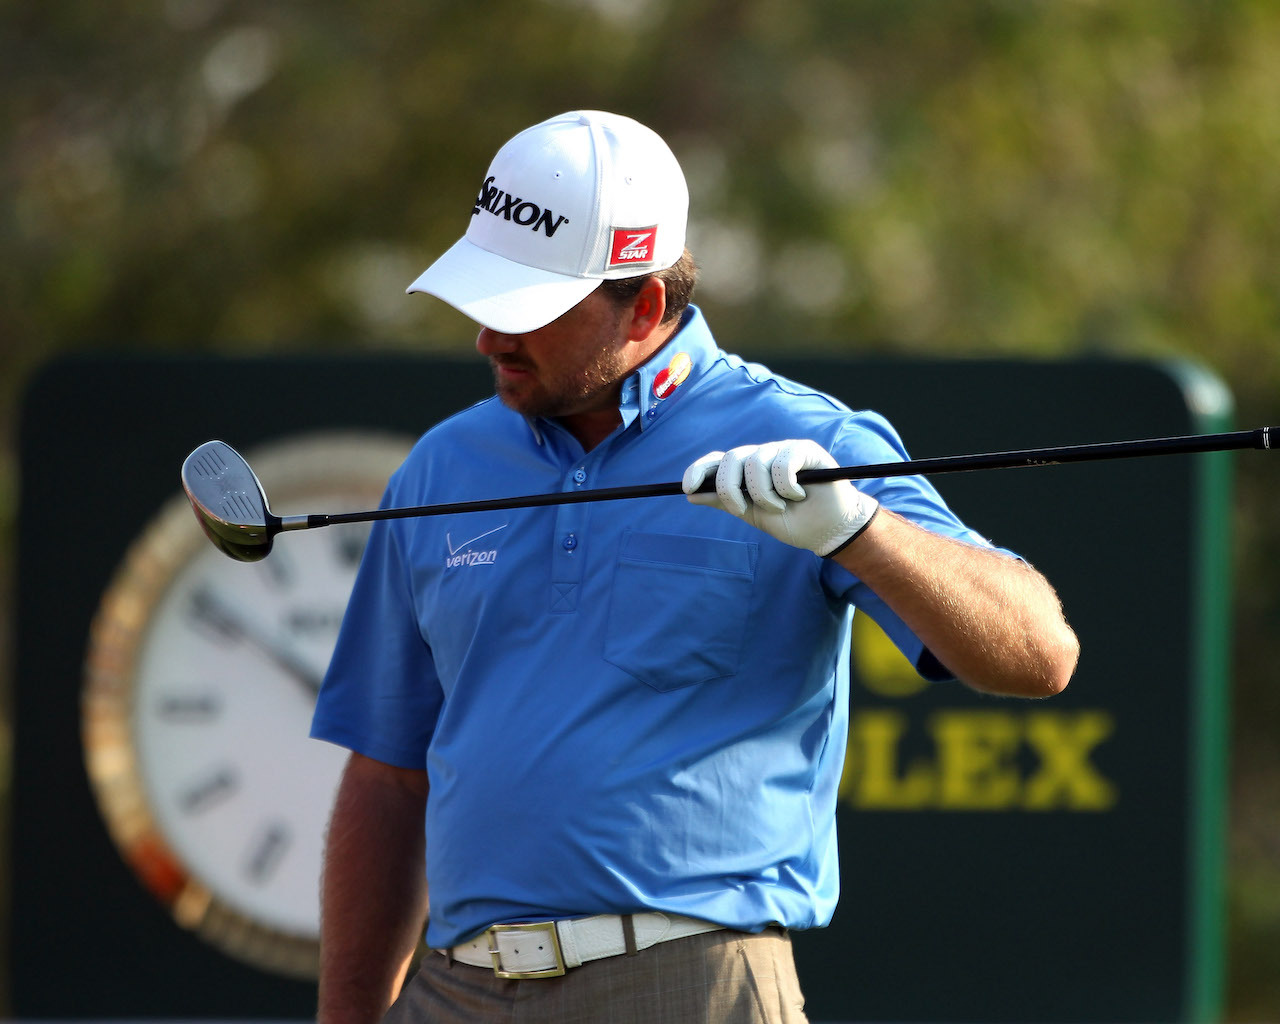 Graeme McDowell checking driver for damage